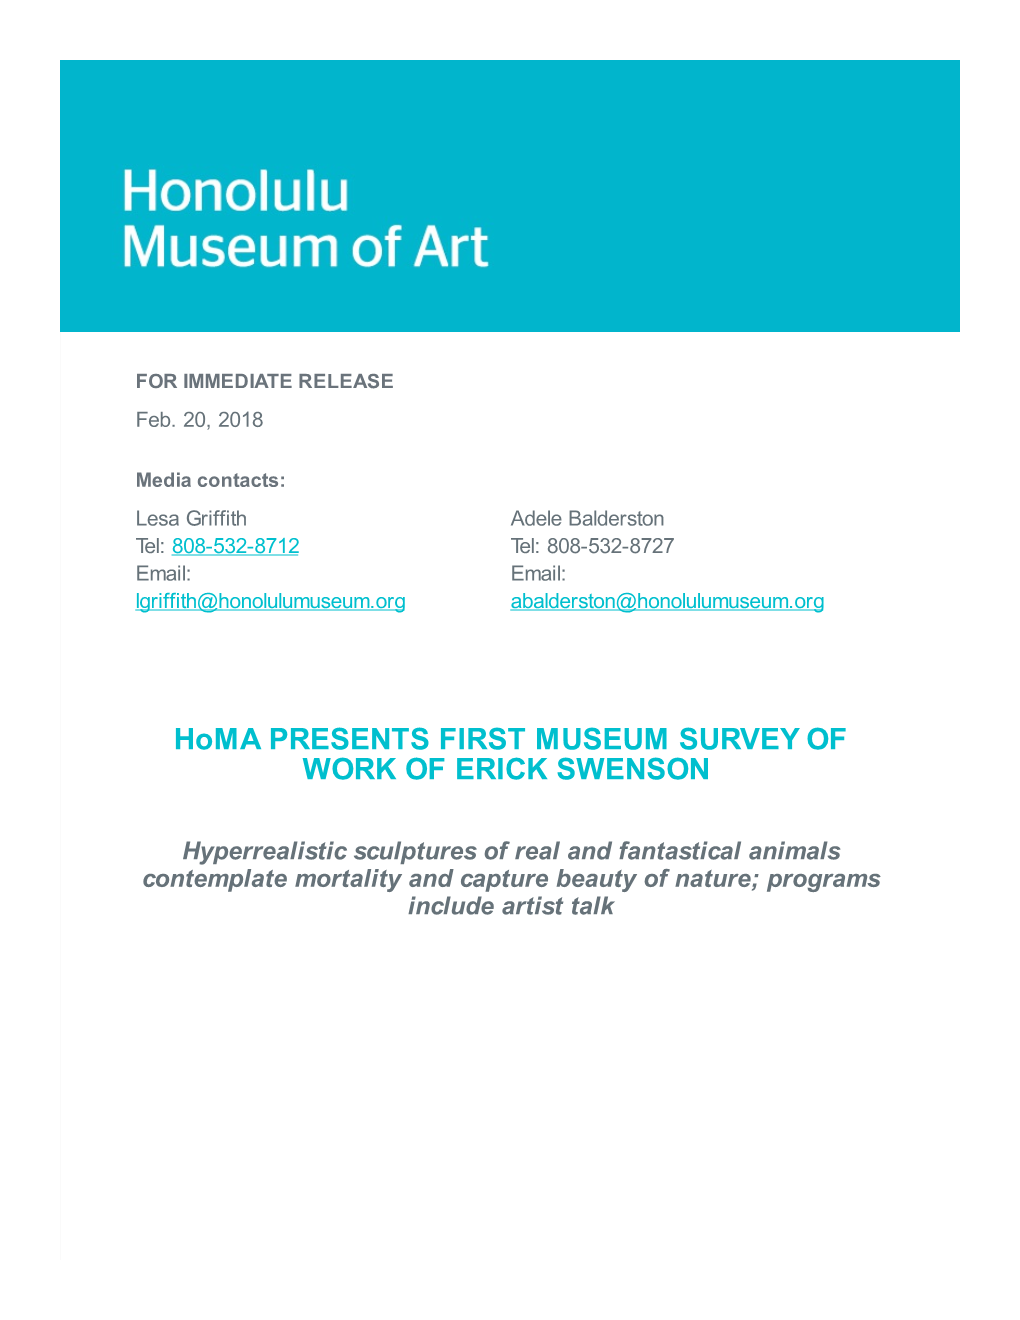 Homa PRESENTS FIRST MUSEUM SURVEY of WORK of ERICK SWENSON